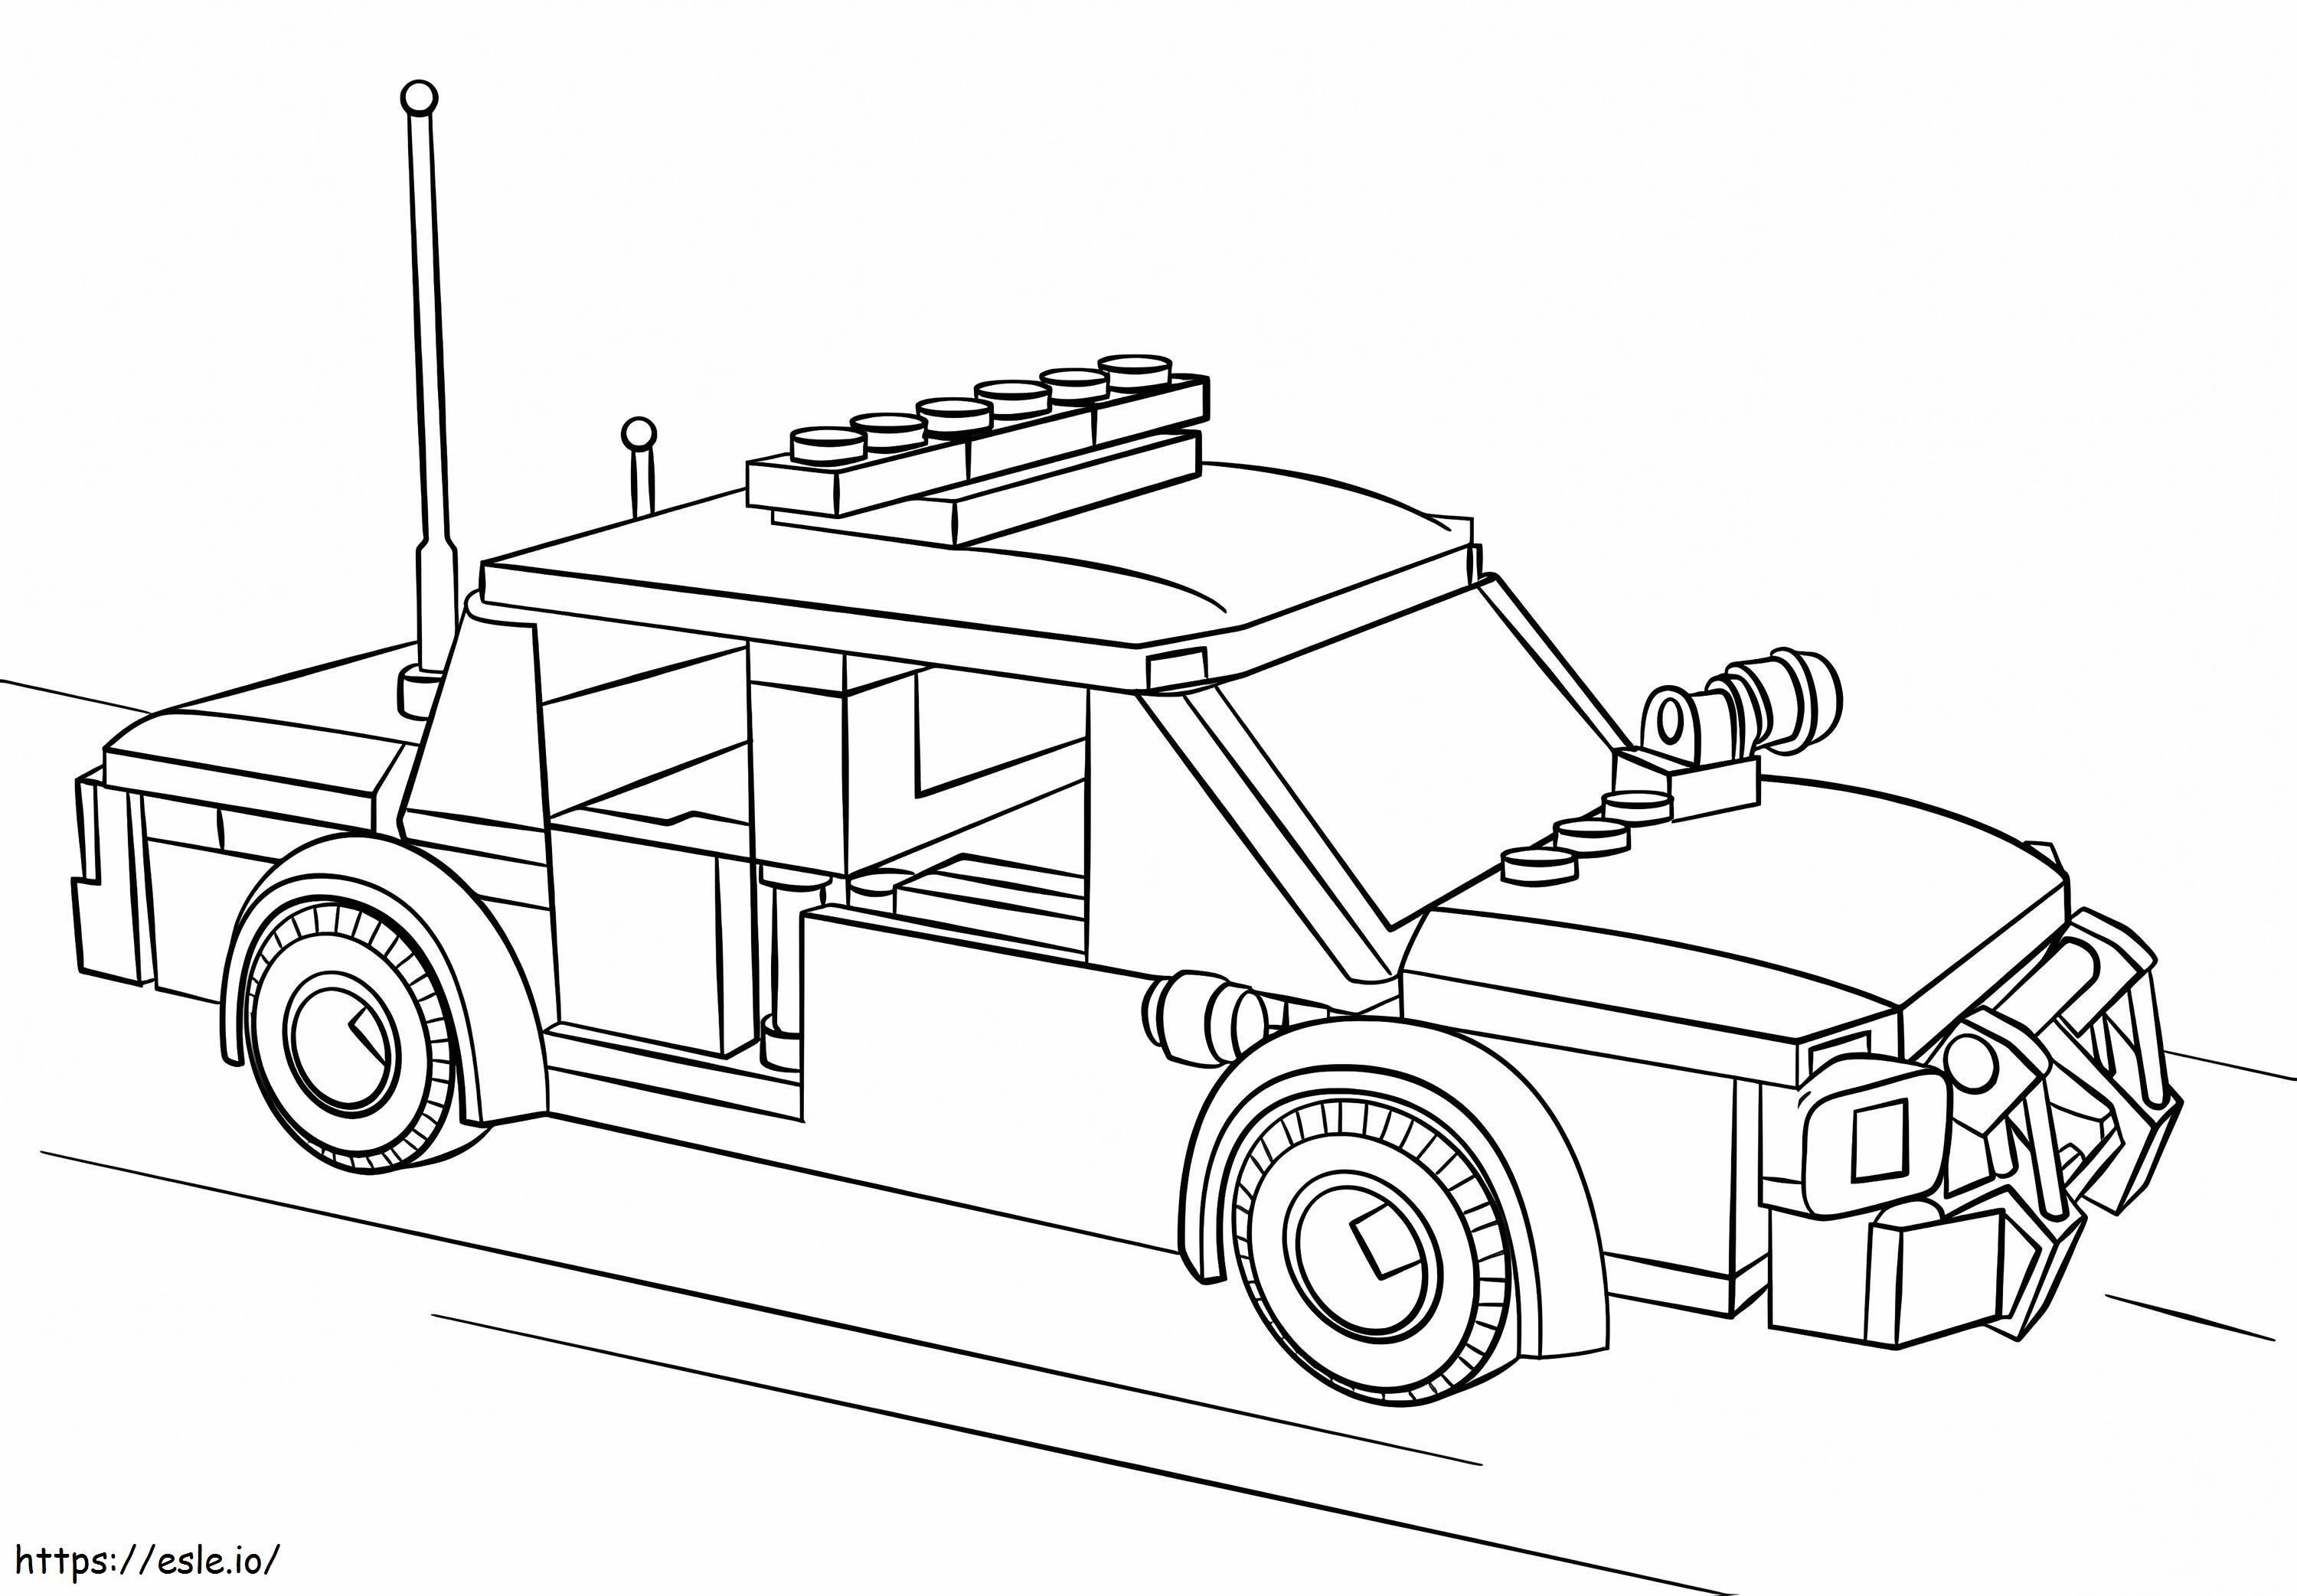 Lego City Police Car coloring page